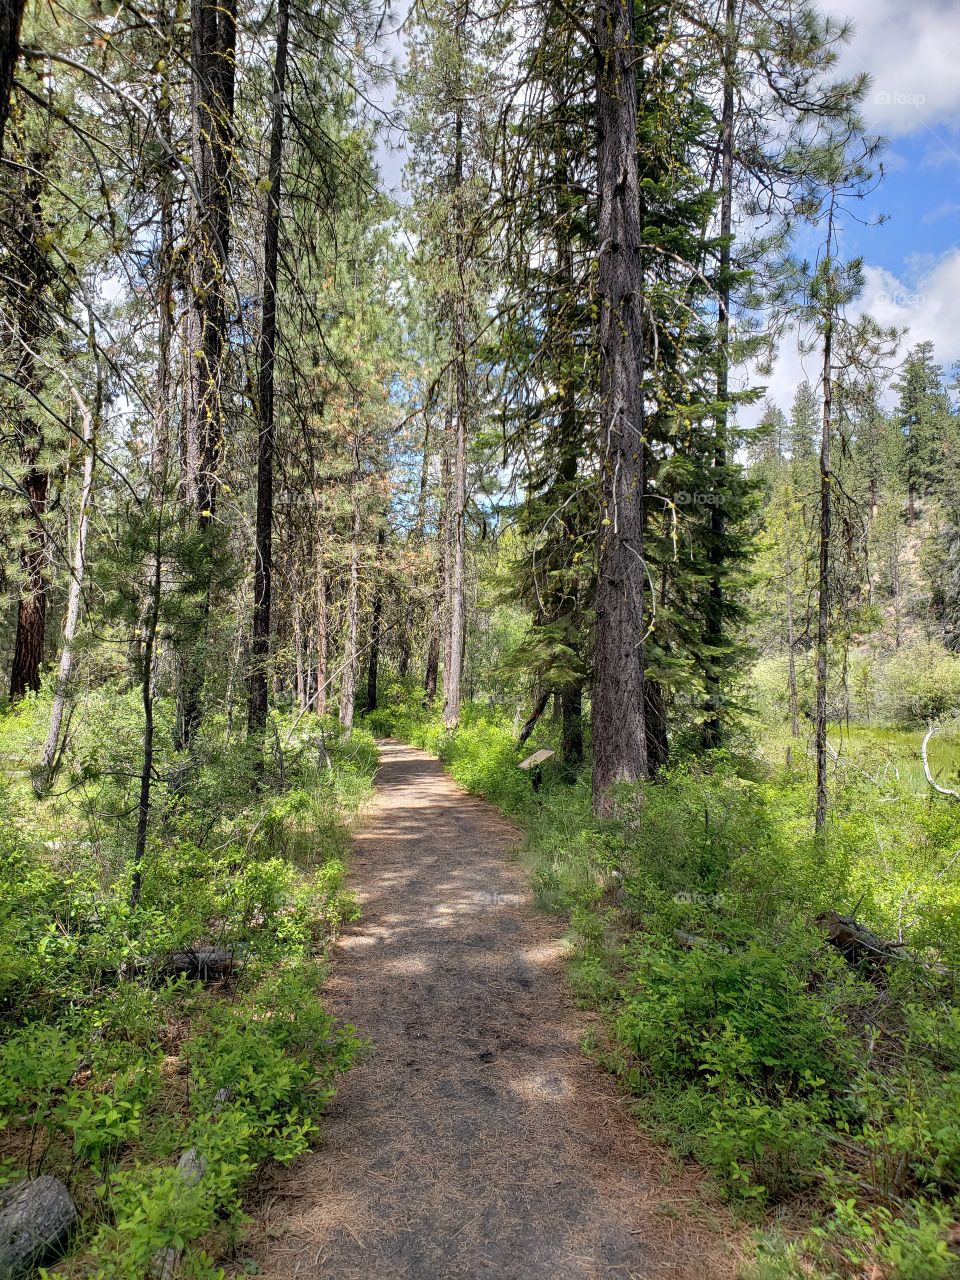 A relaxing path leads through the Deschutes National Forest in Central Oregon with blue skies and fluffy white clouds above on a sunny summer day.